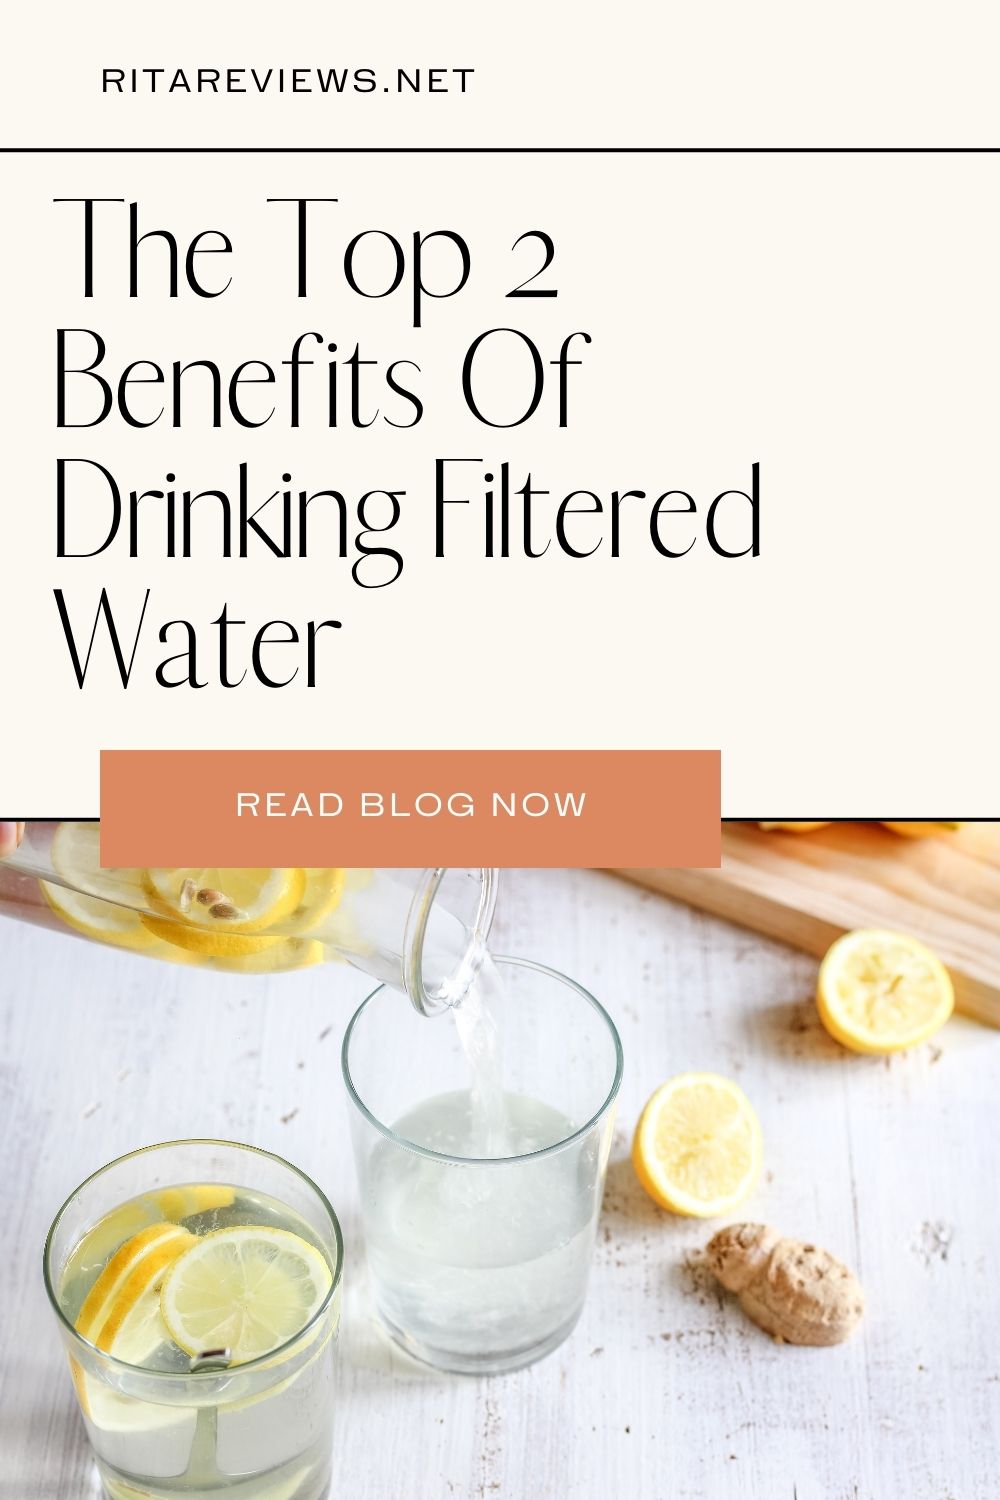 The Top 2 Benefits Of Drinking Filtered Water